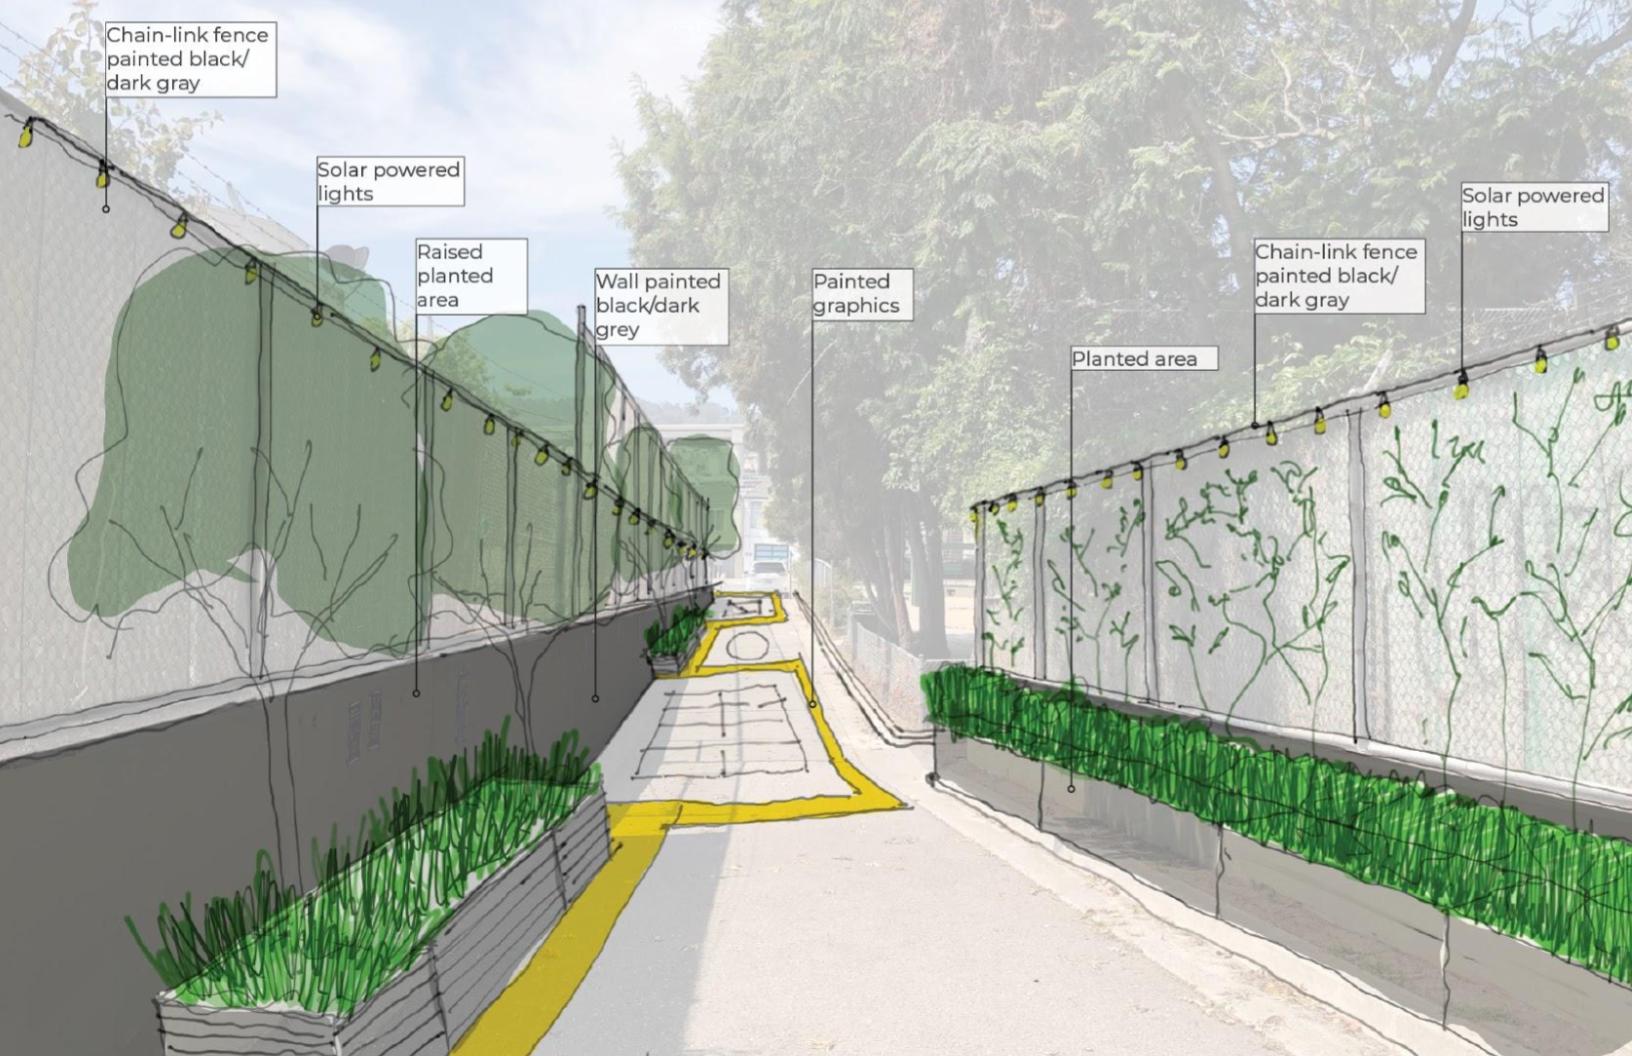 A drawing of an improved Ledyard Alley is layered over a photo of the current Ledyard Alley. The drawing includes plantings on both sides of the alley, painted graphics on the street, and new chain link fences with solar powered lighting.